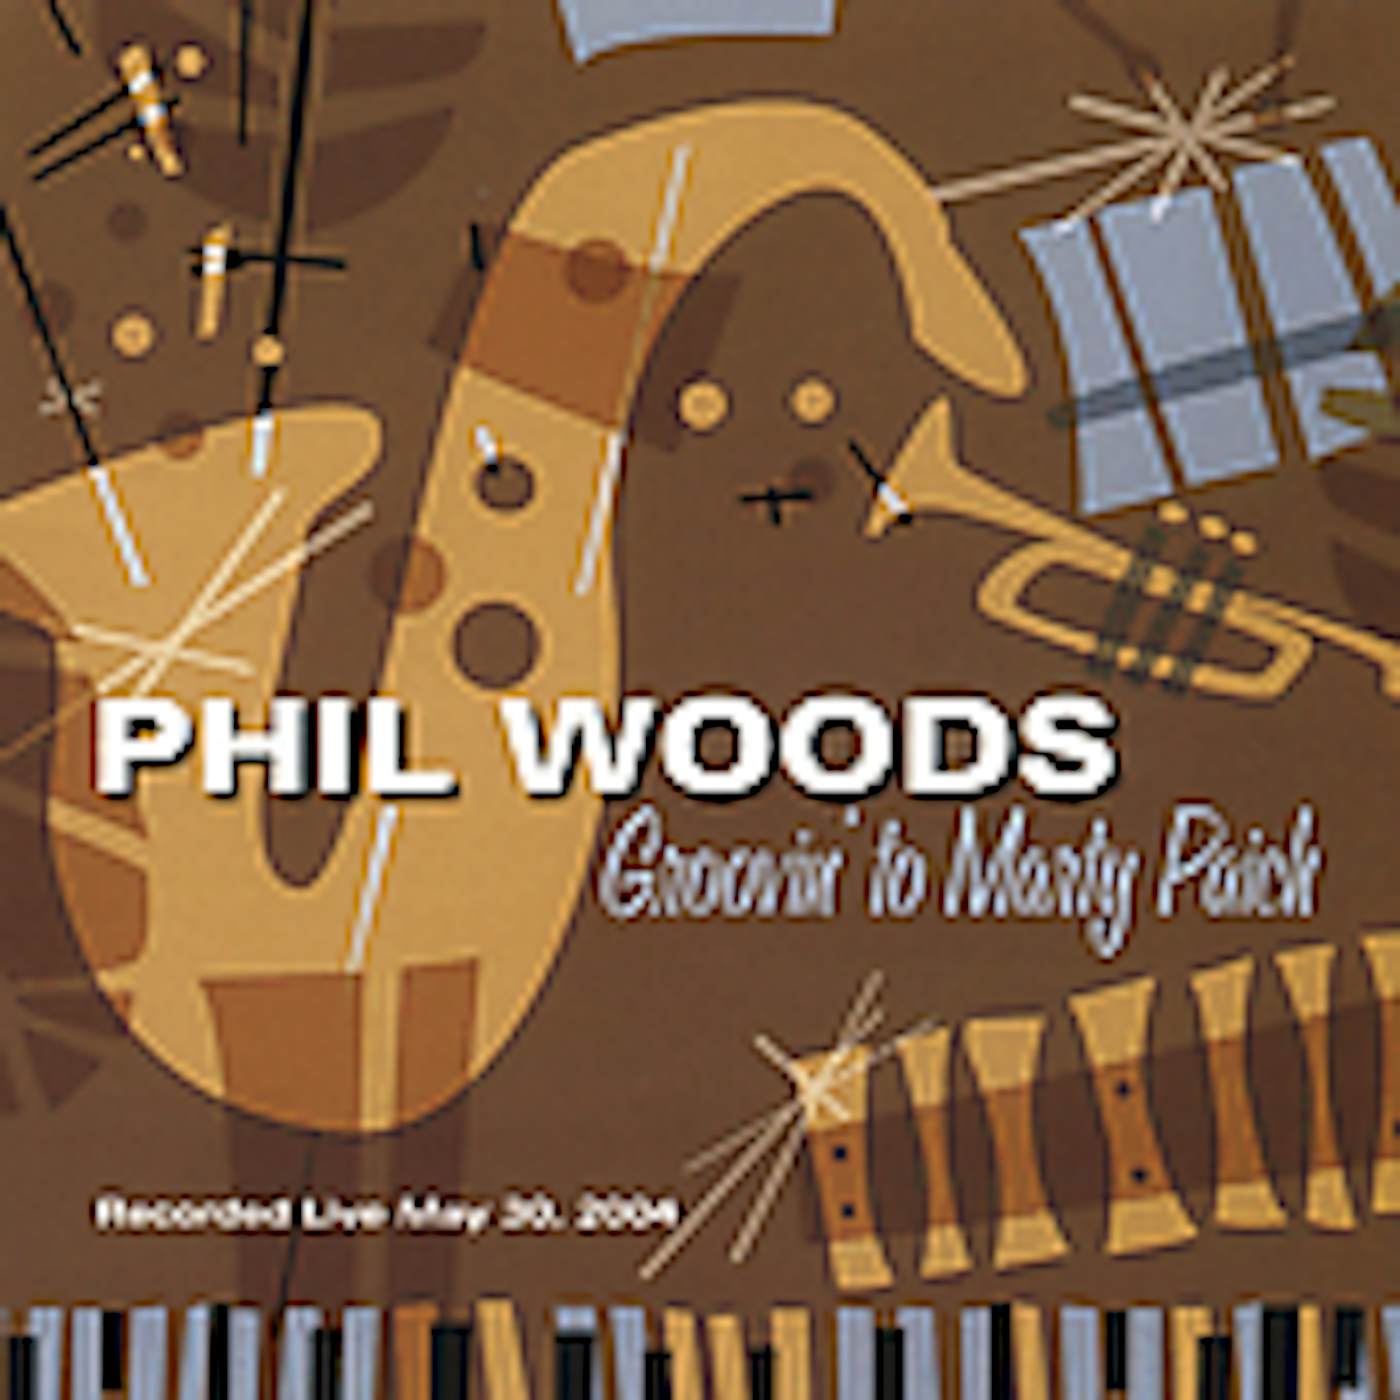 Phil Woods GROOVIN TO MARTY PAICH CD